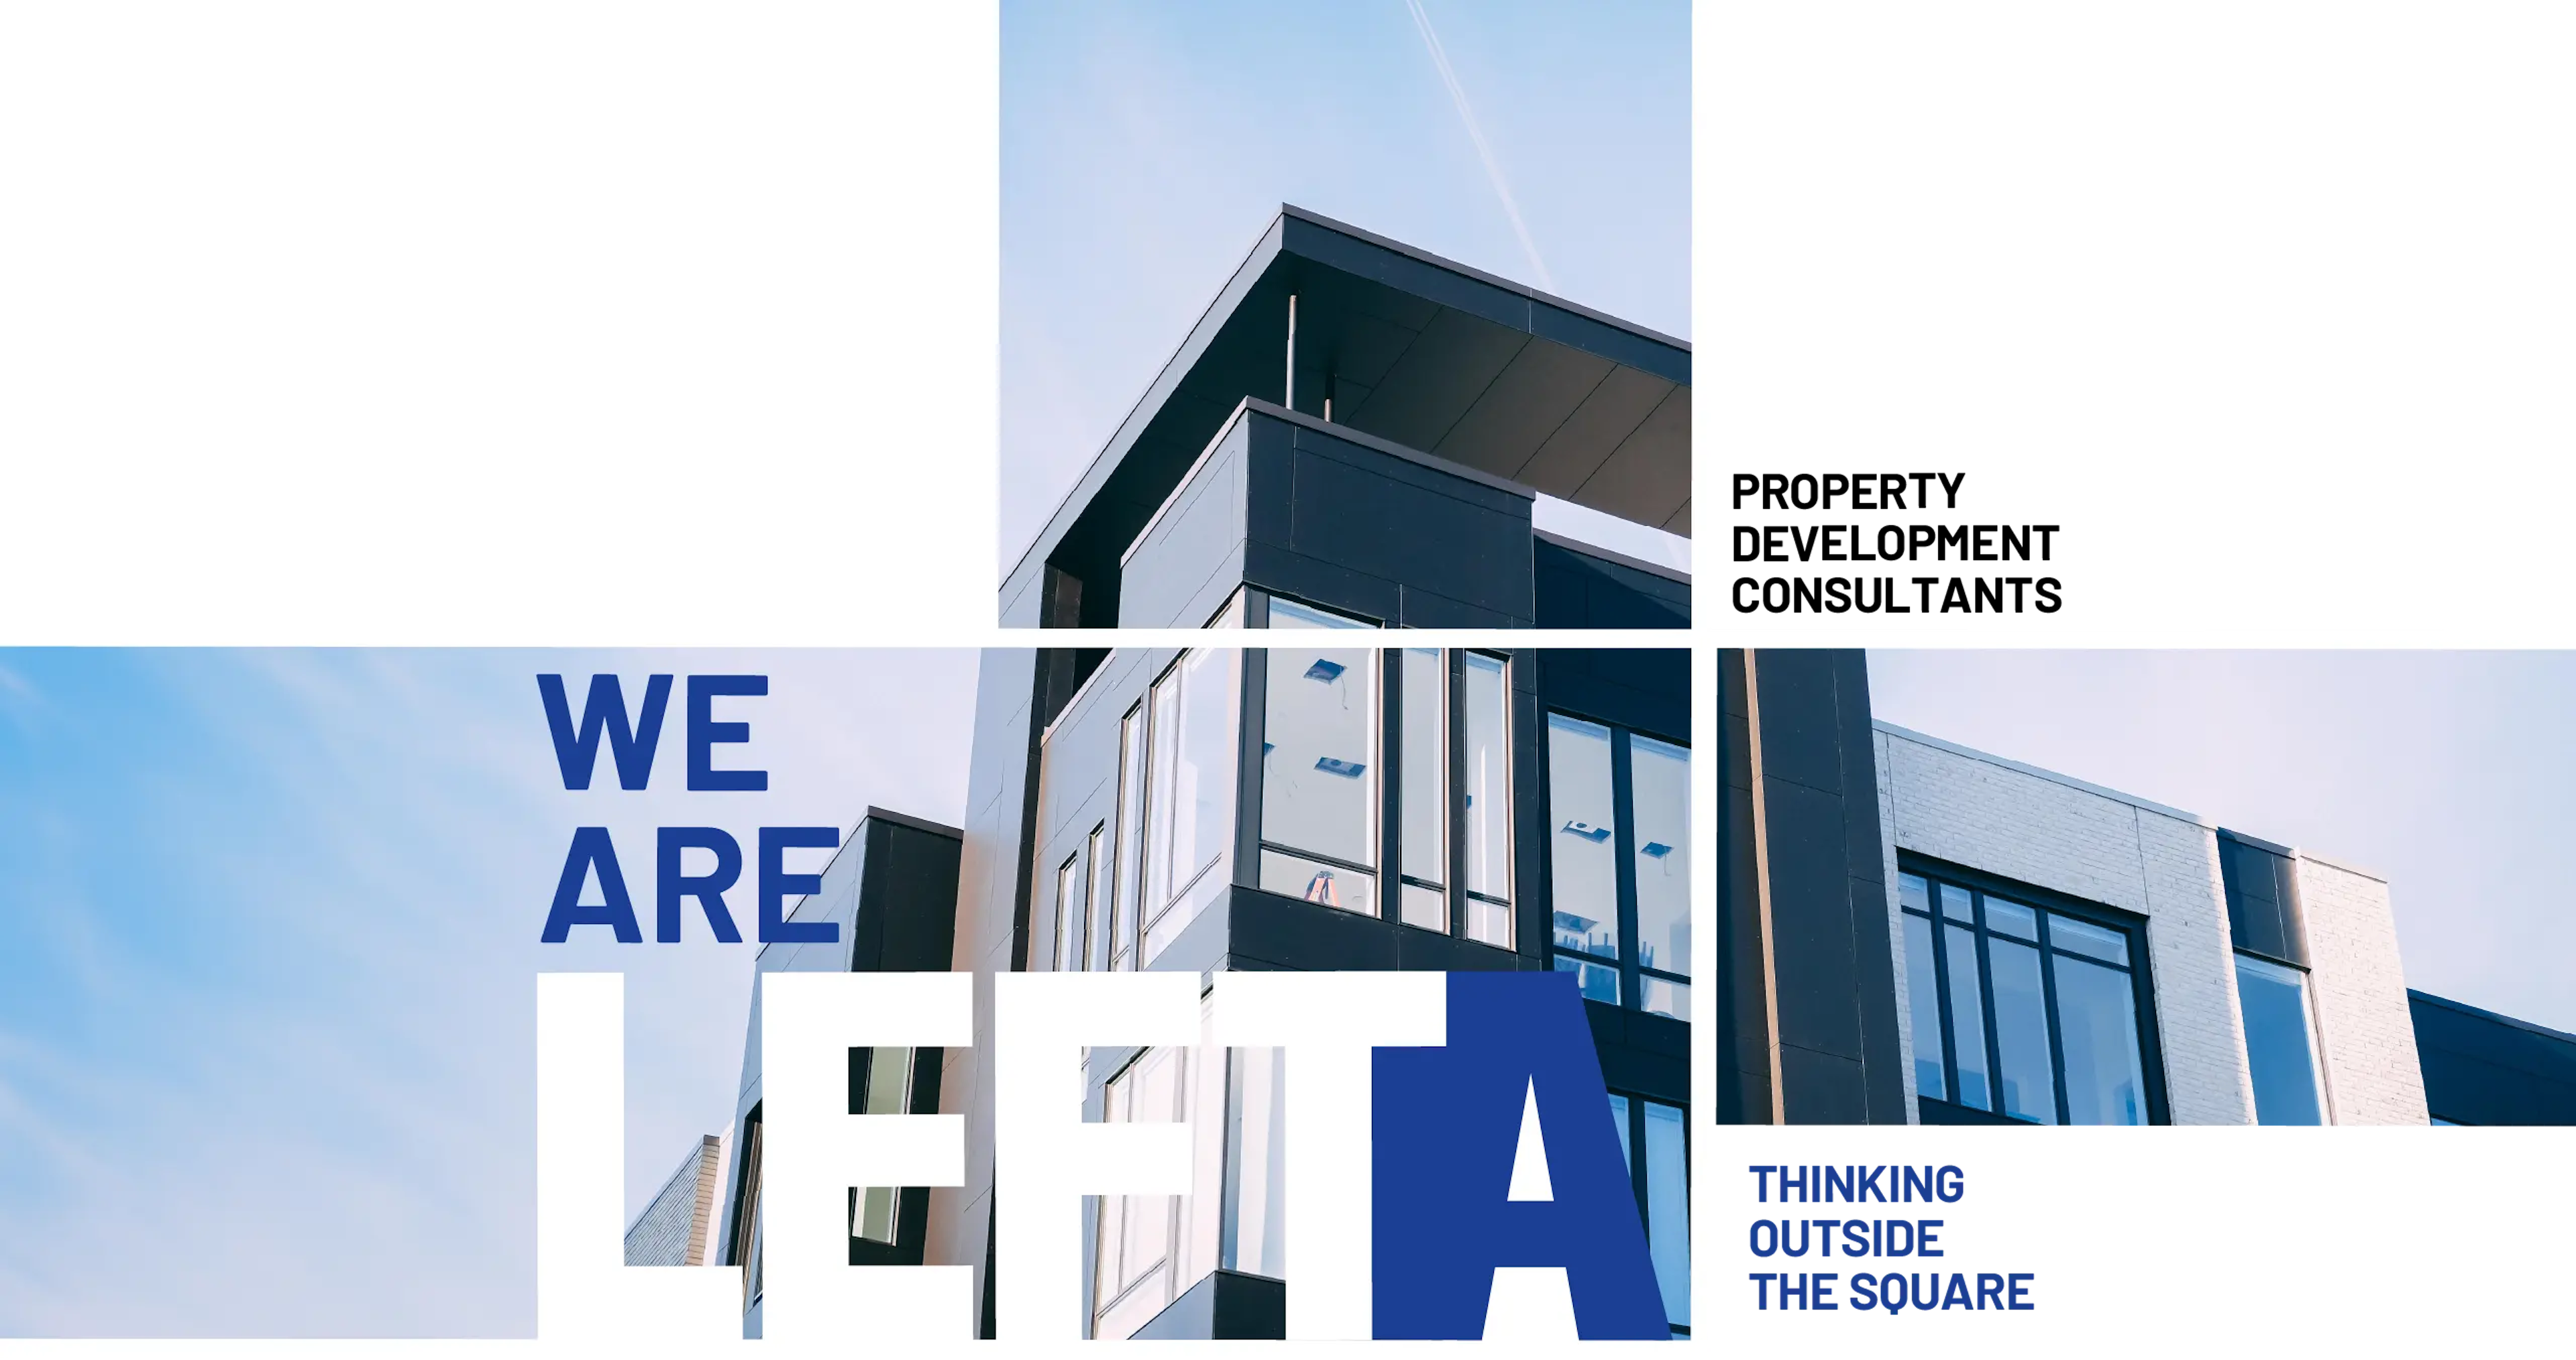 We are LEFTA - Property development consultants thinking outside the square